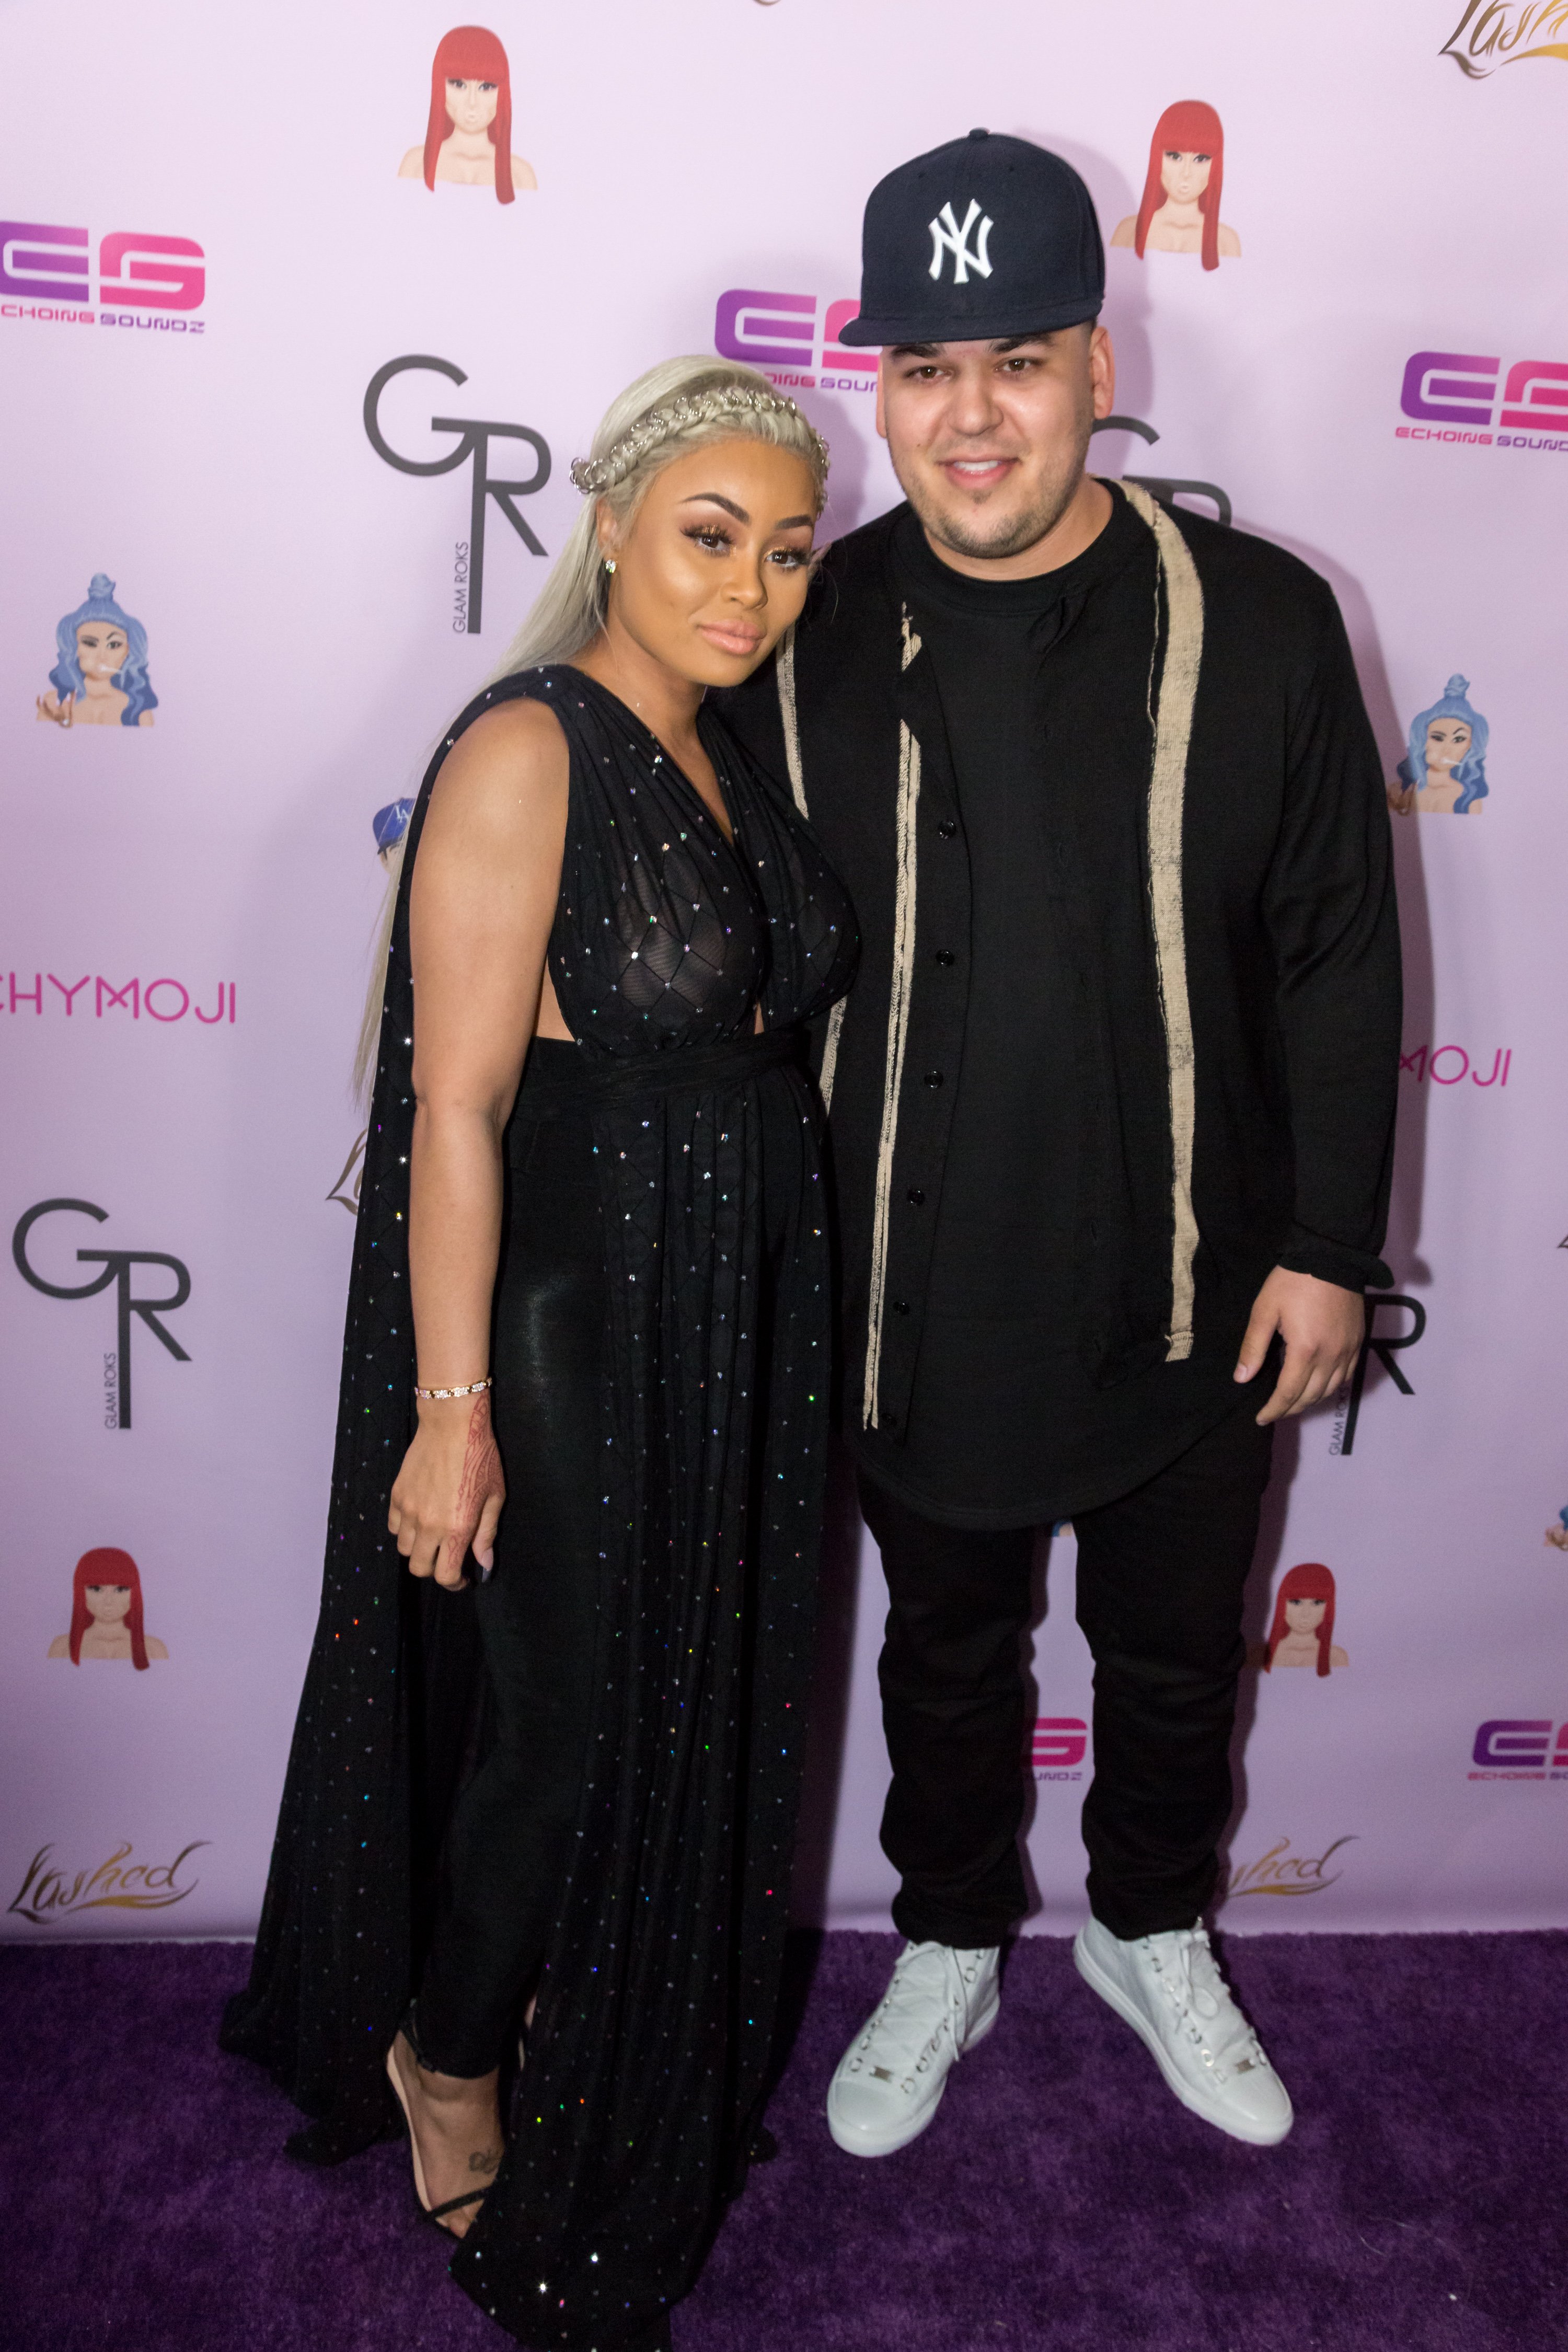 Rob Kardashian and Blac Chyna pictured here in May 2016 at her birthday celebration in Hollywood, California. | Photo: Getty Images